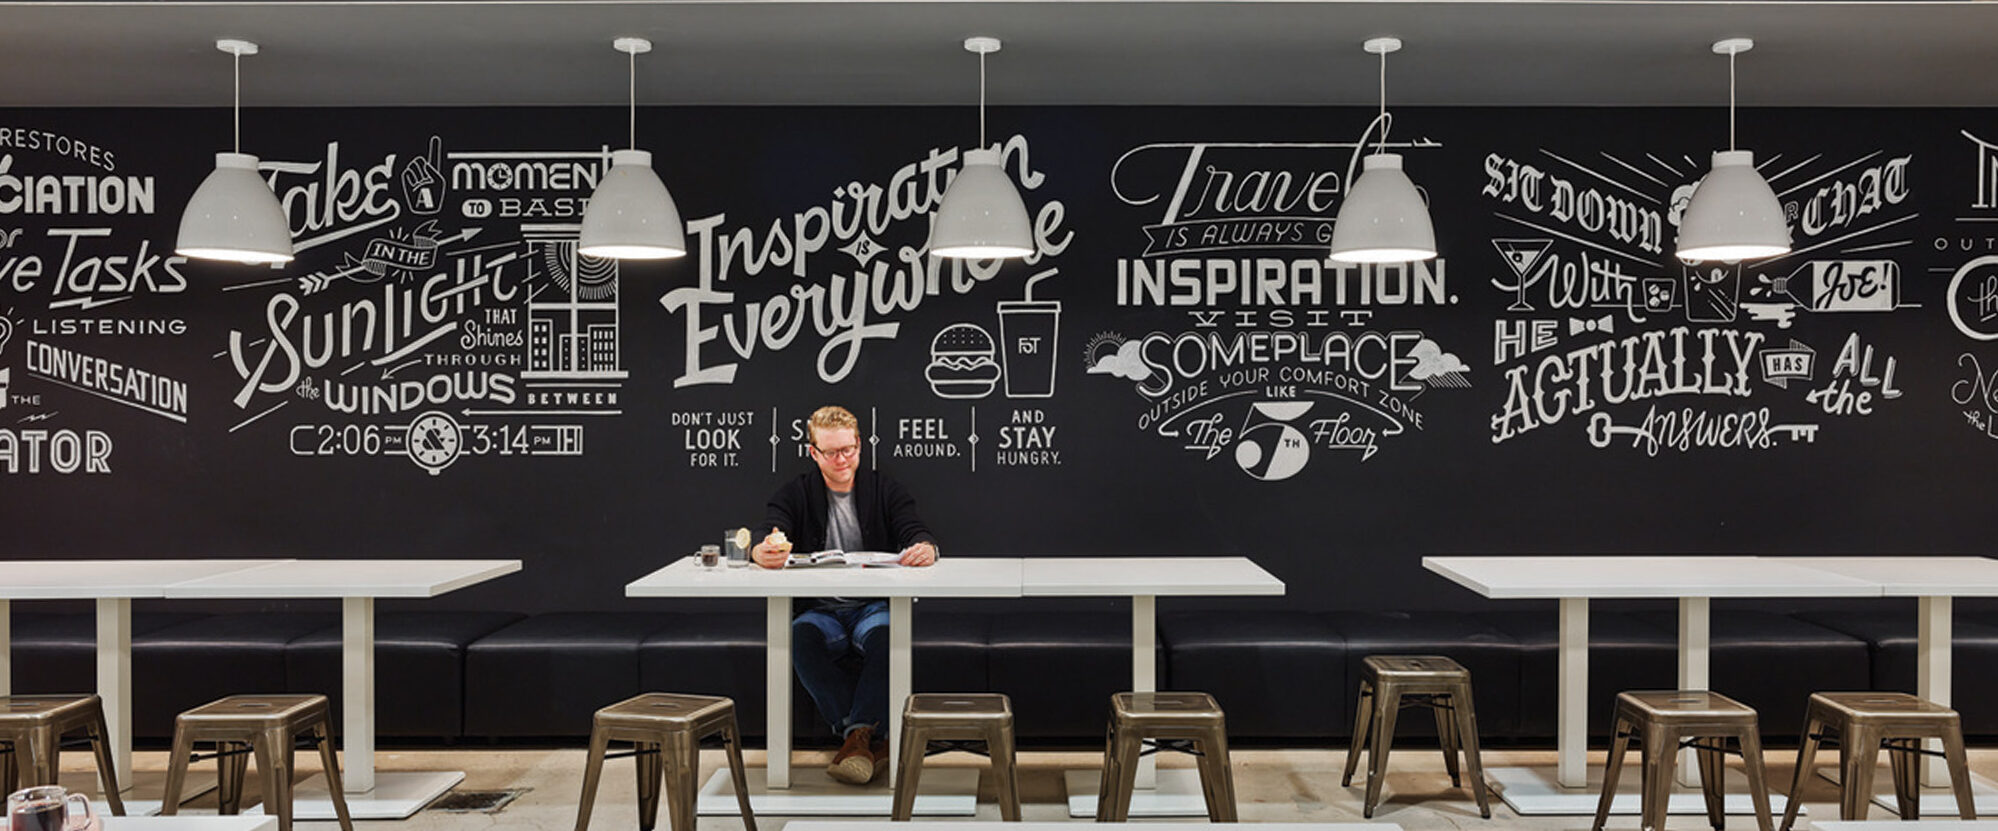 Cafeteria with chalkboard walls filled with creative and inspirational quotes, industrial style lighting, and simple furniture.